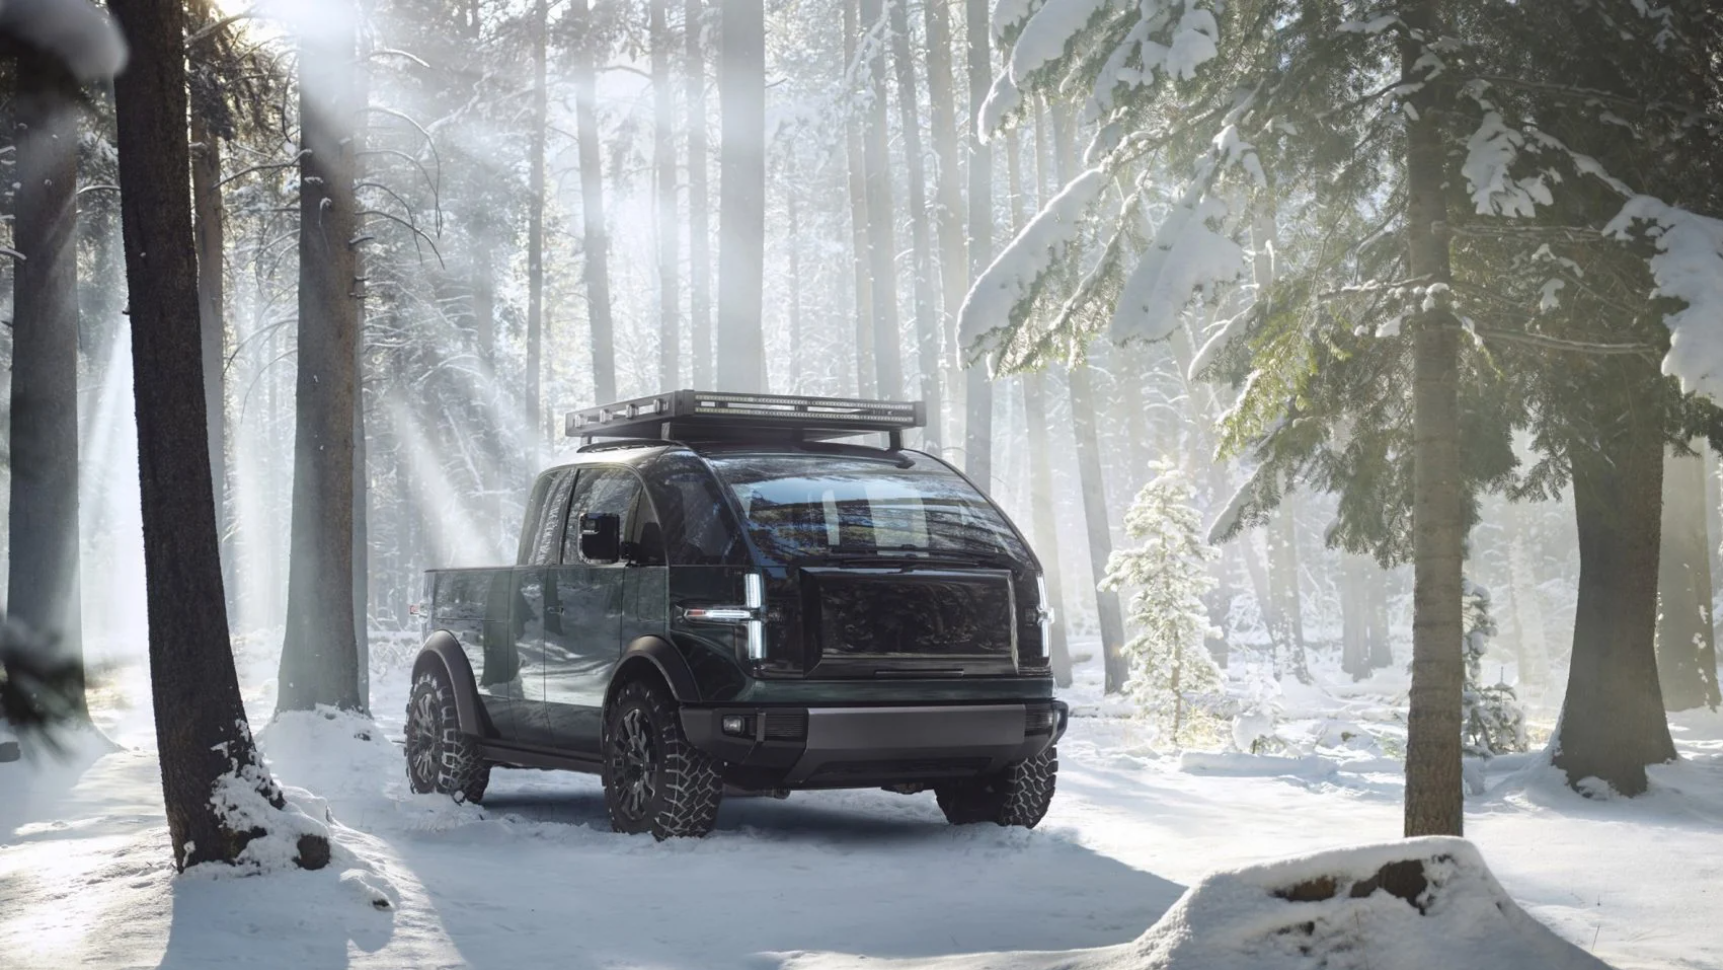 You can work from the middle of the forest in the comfort of your Canoo electric pickup